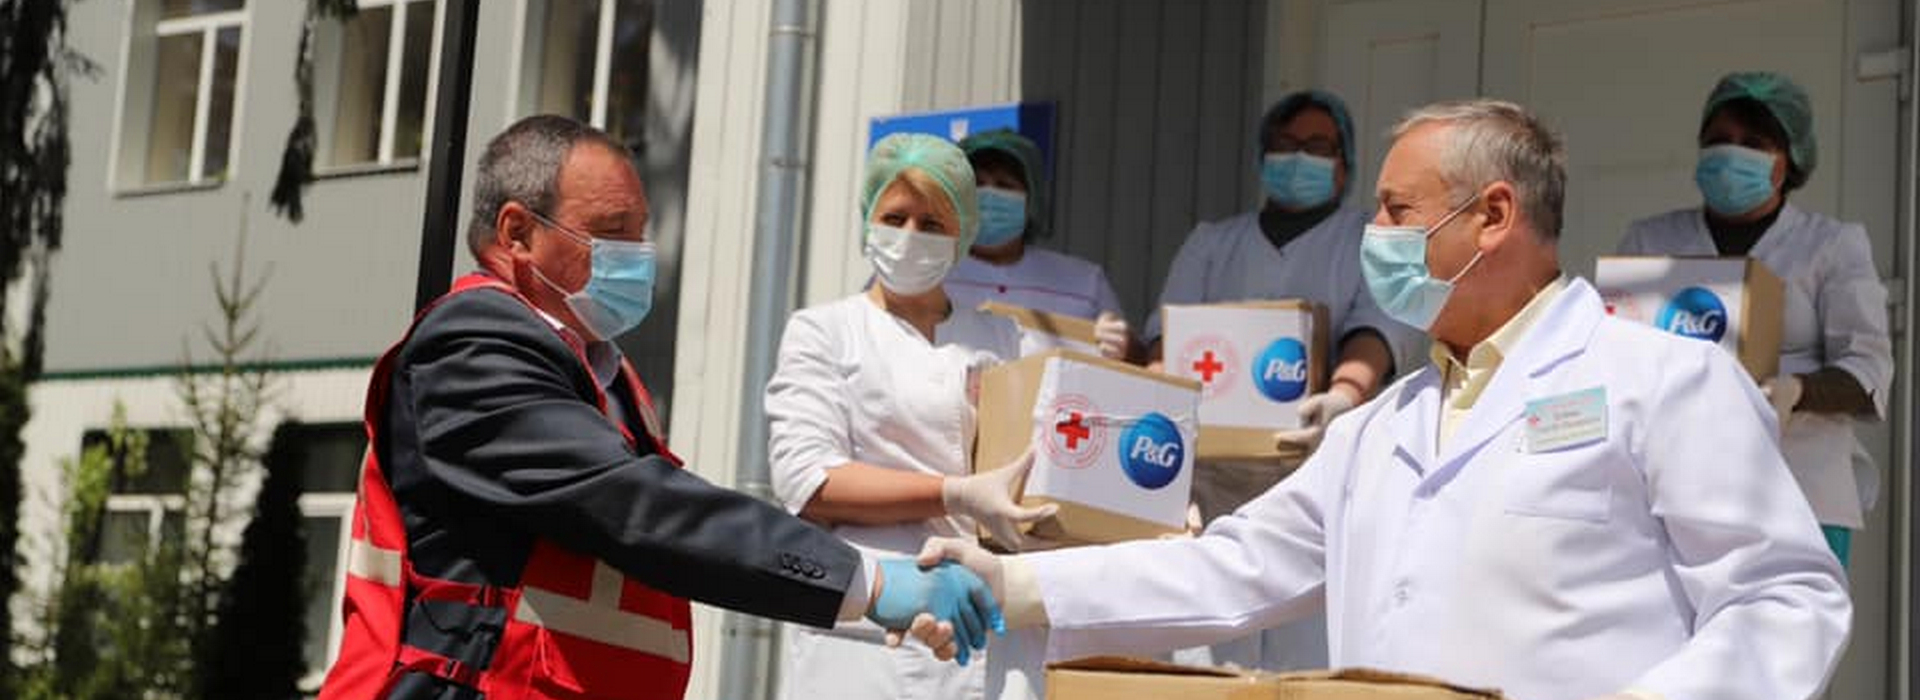 Procter & Gamble and the Red Cross Support the Medical Community in Ukraine